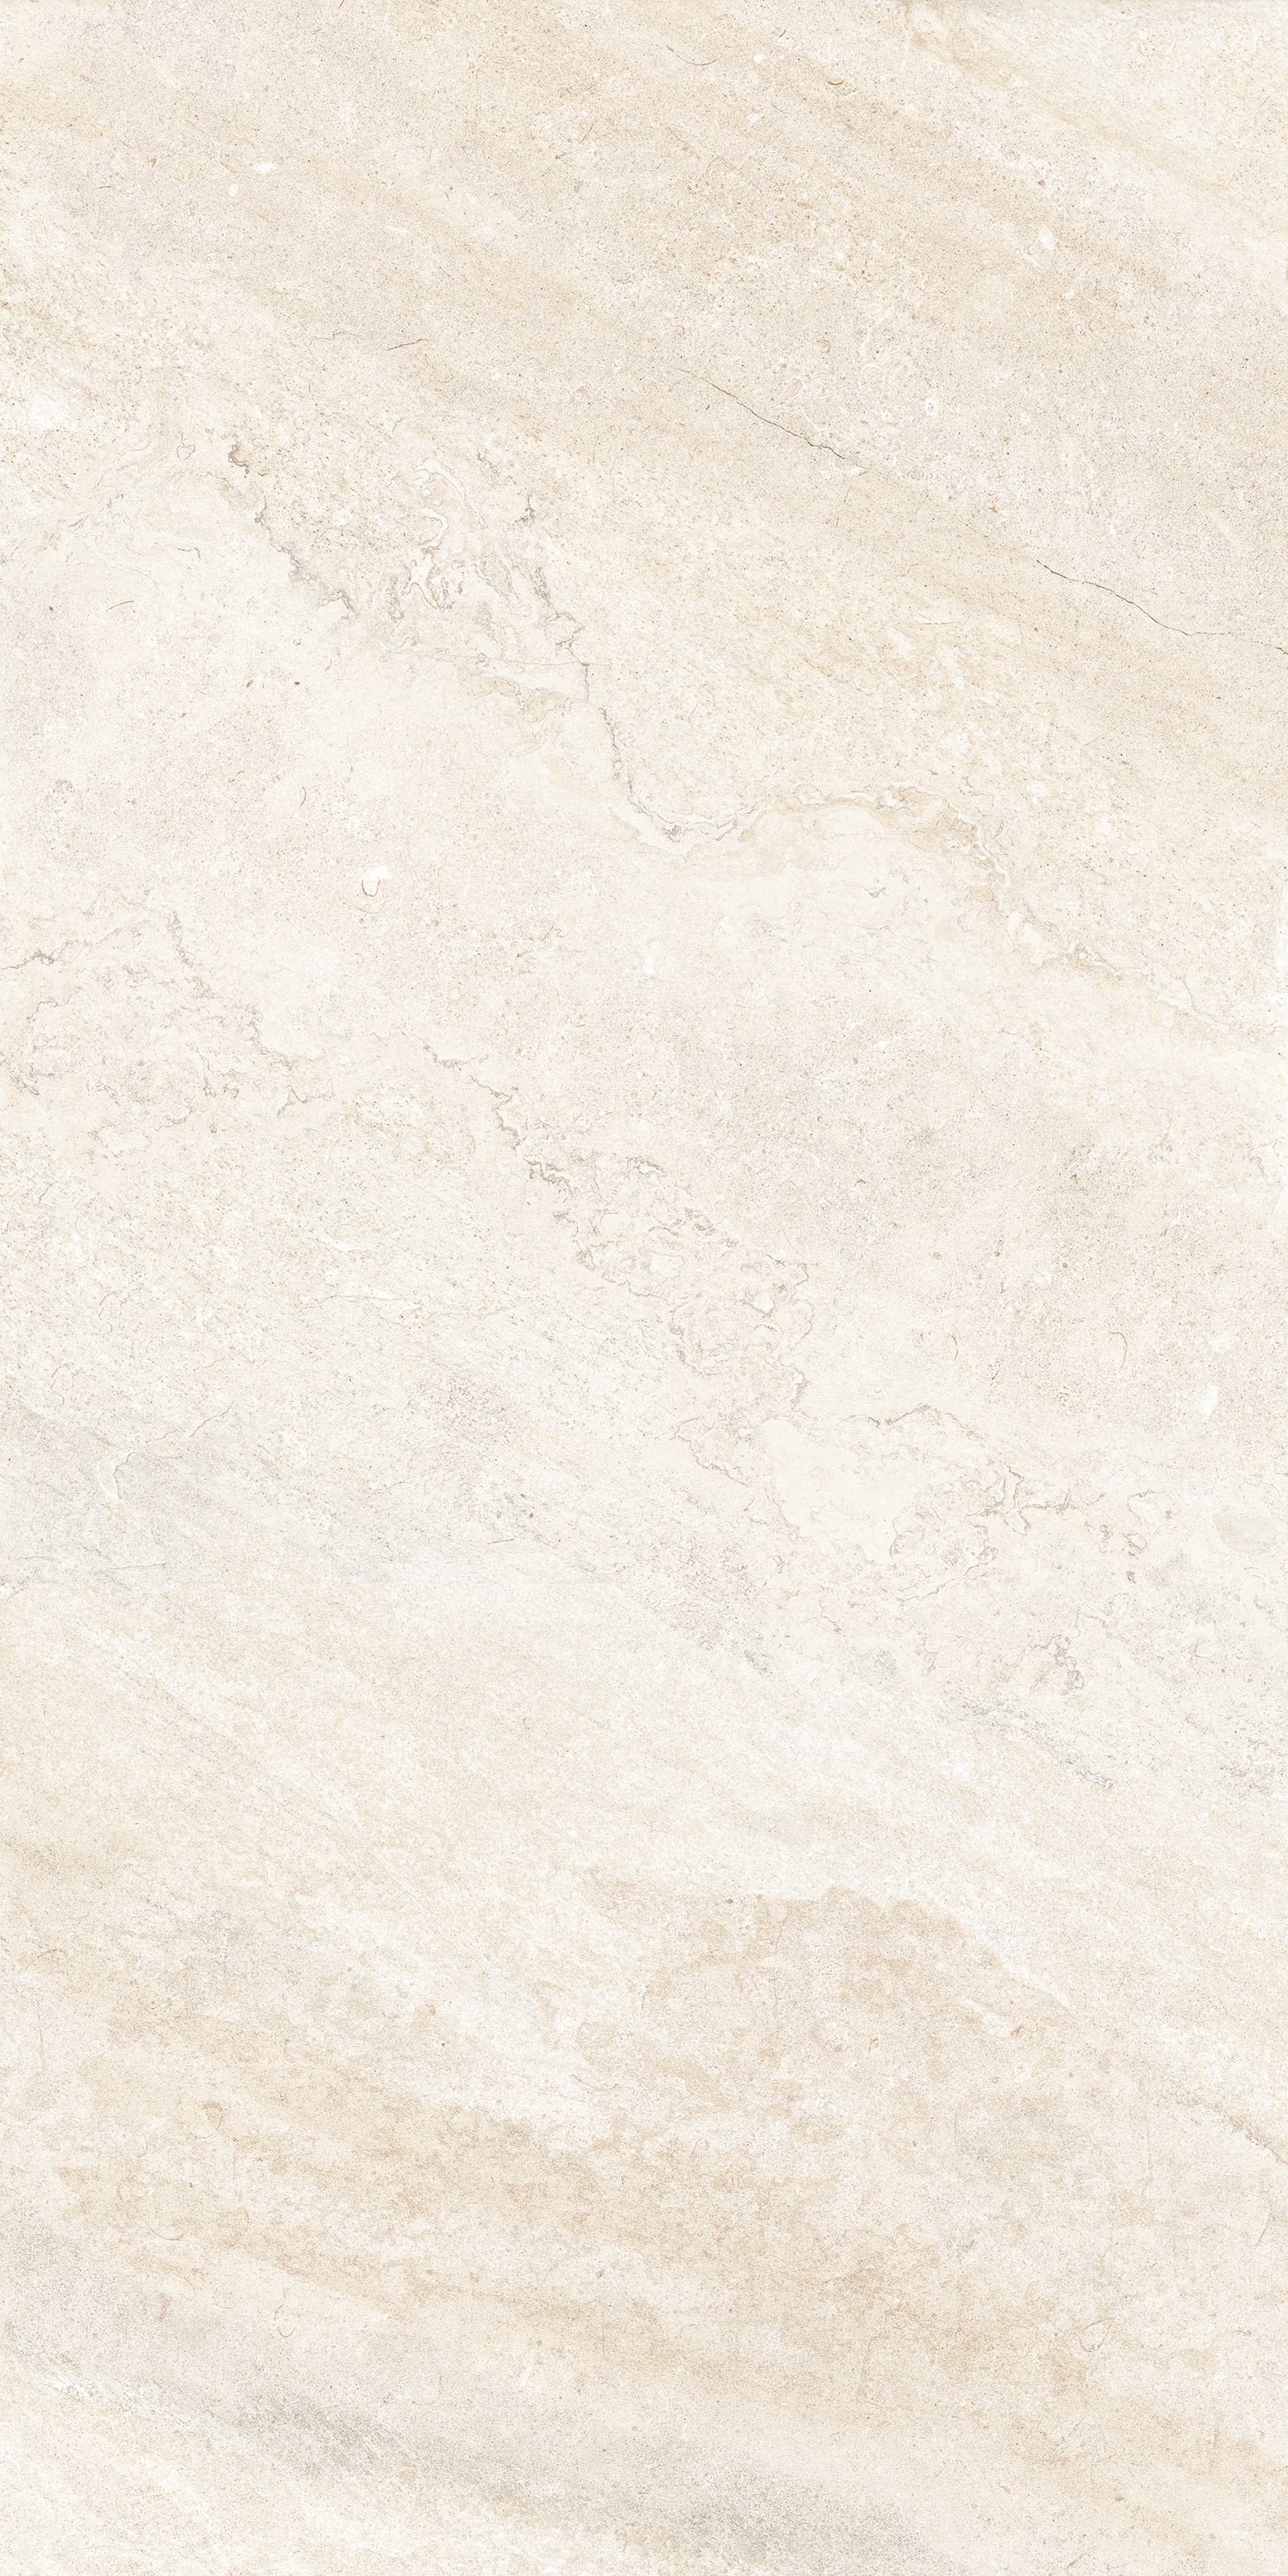 Refin Blended Beige Out 2.0 OB61 60x120cm rectified 20mm